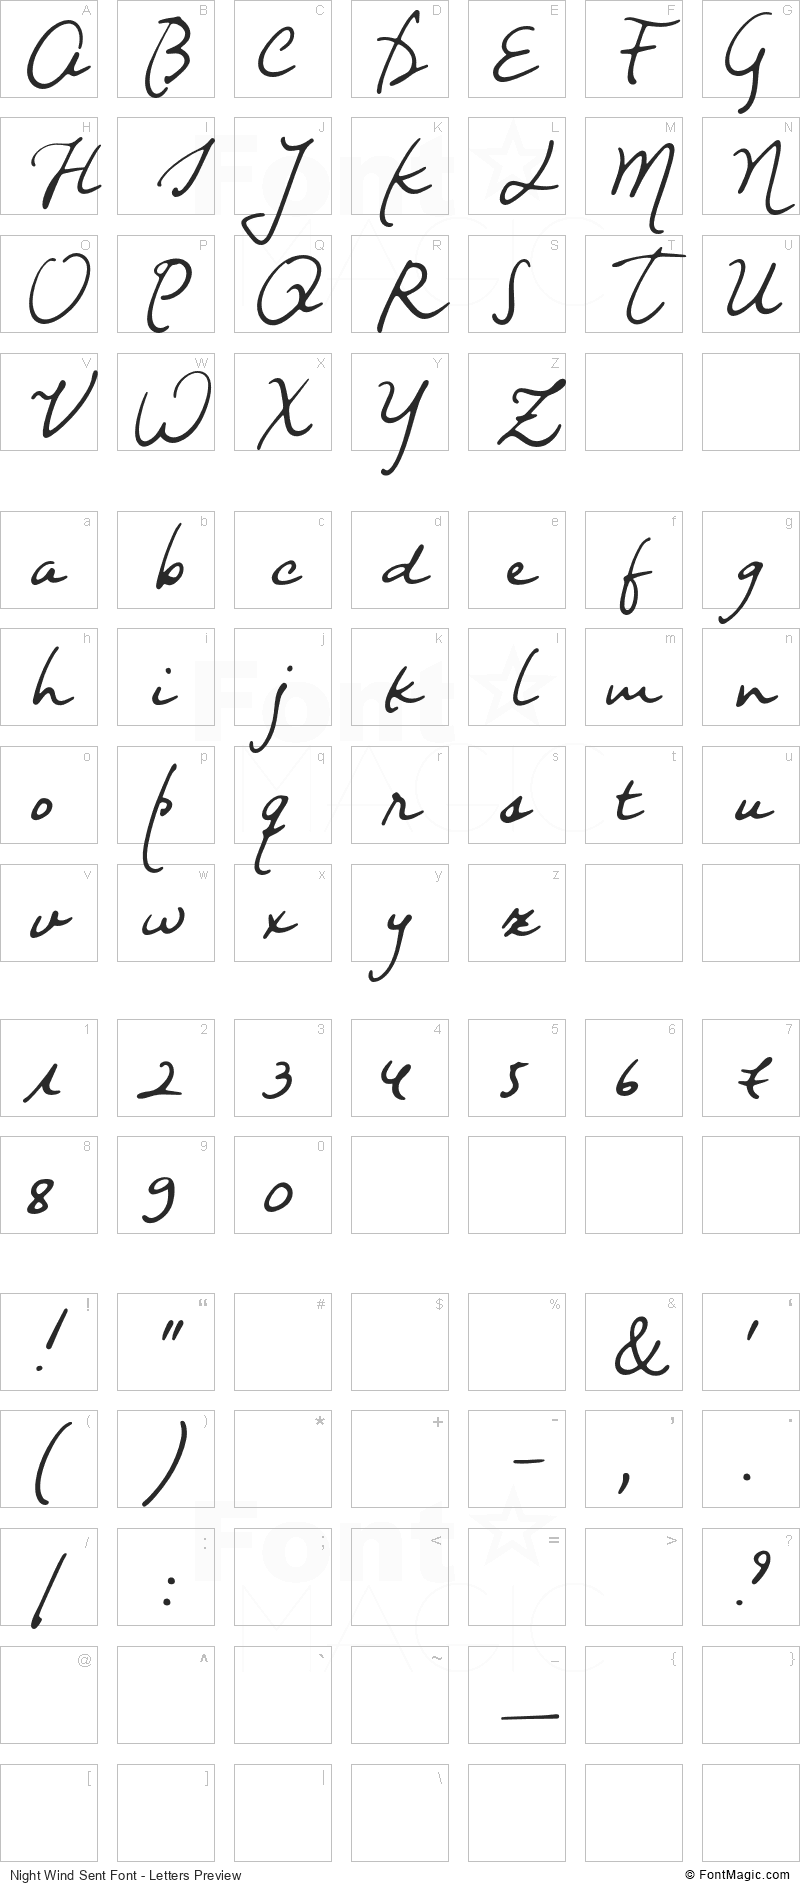 Night Wind Sent Font - All Latters Preview Chart